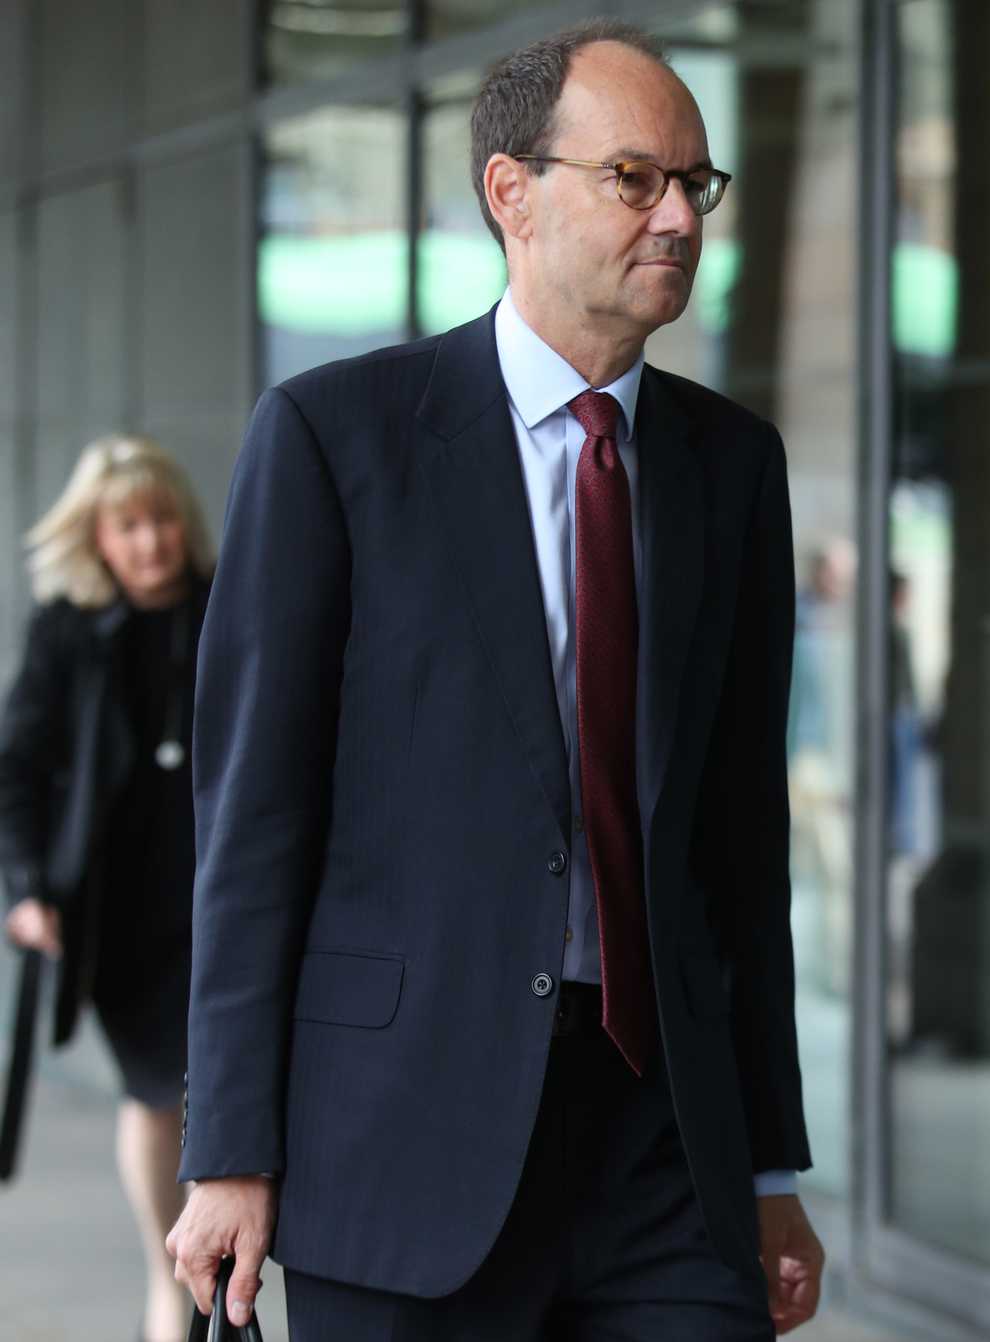 Former Sainsbury’s chief executive Mike Coupe